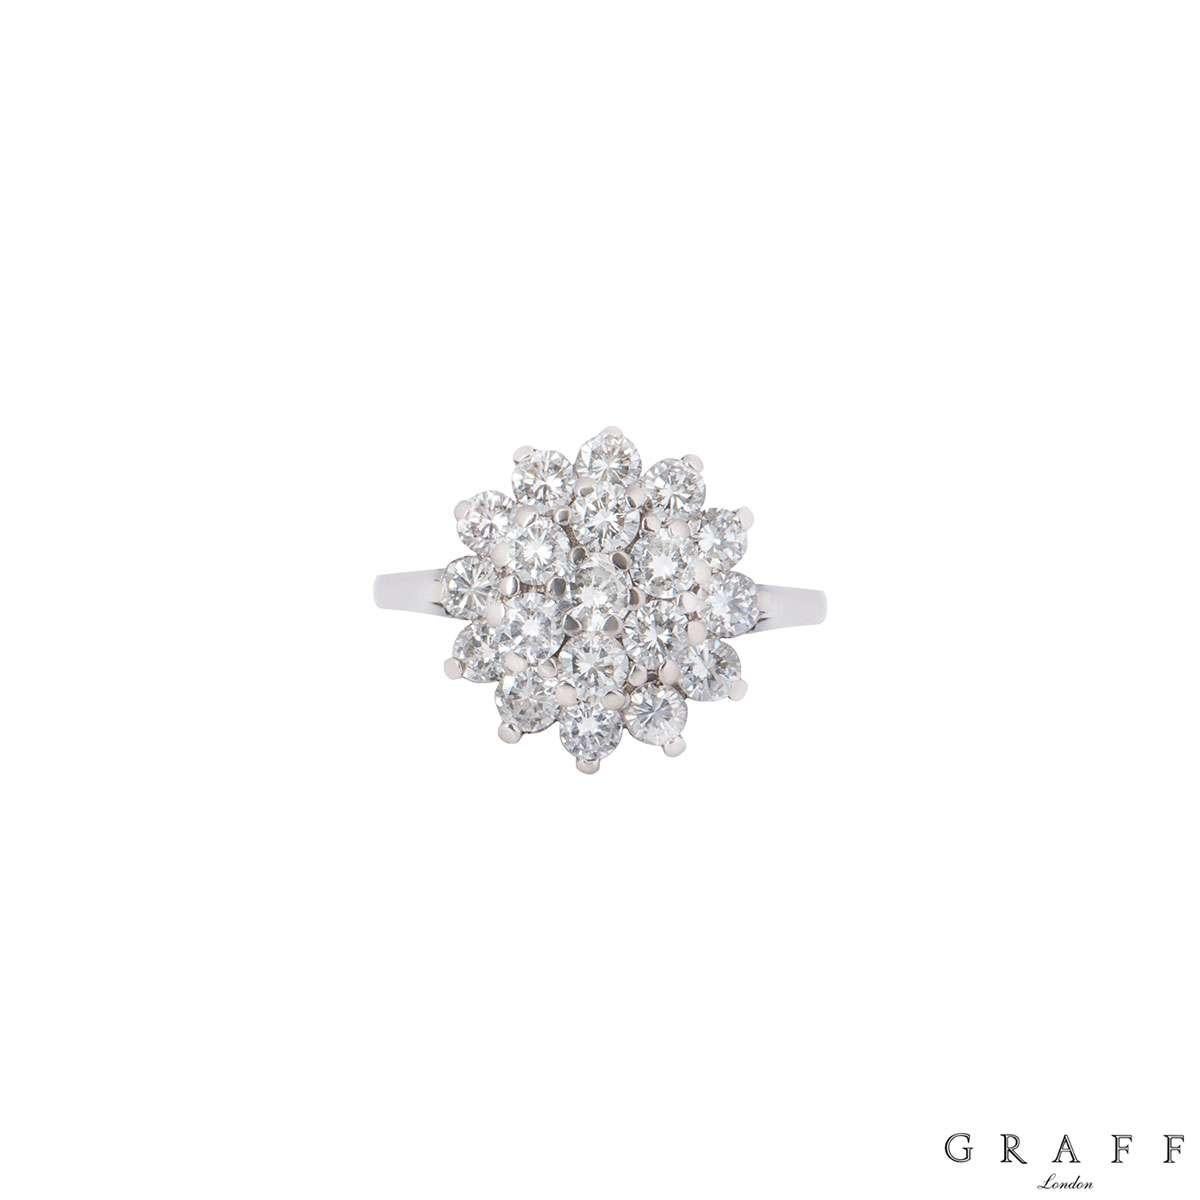 An 18k white gold diamond ring by Graff. The ring features a floral design made up of a cluster of 19 round brilliant cut diamonds with an approximate carat weight of 1.33ct. The ring is size UK N, EU53 and US 6½ but can be adjusted for a perfect